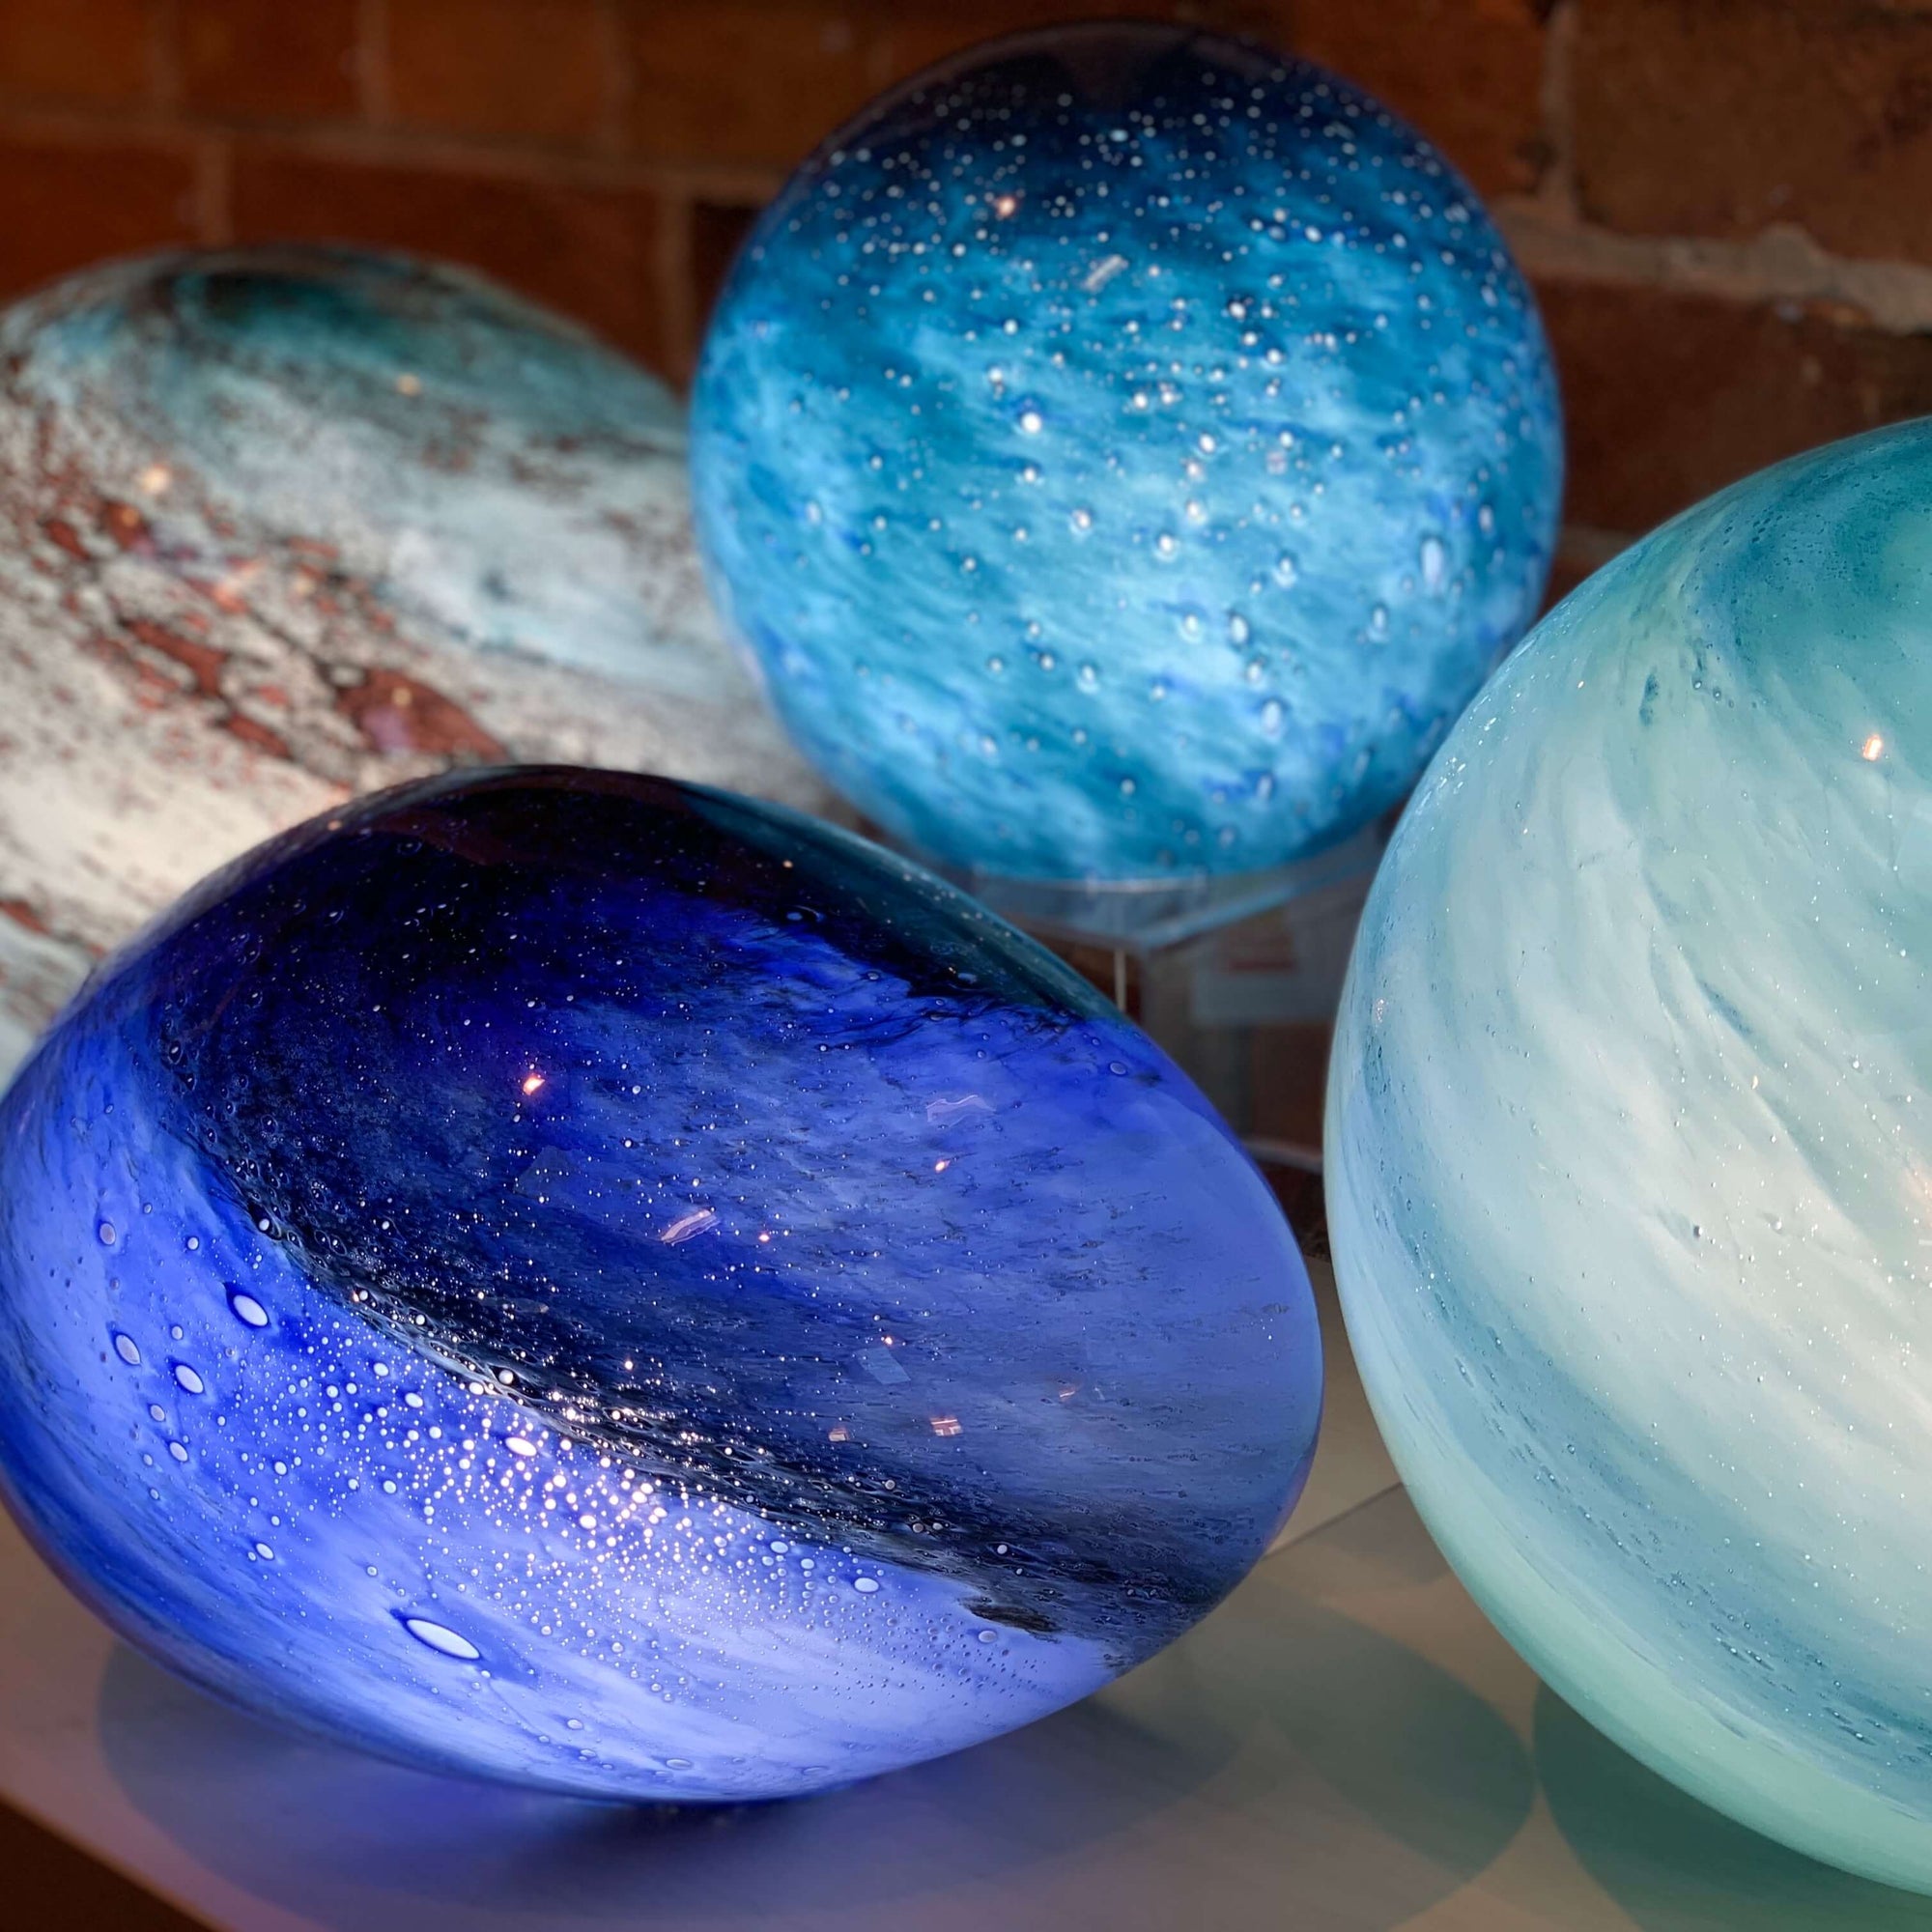 A cluster of our blown glass orb lights, handmade with planet like colouring and a smooth surface. Available at Ferrers Gallery.